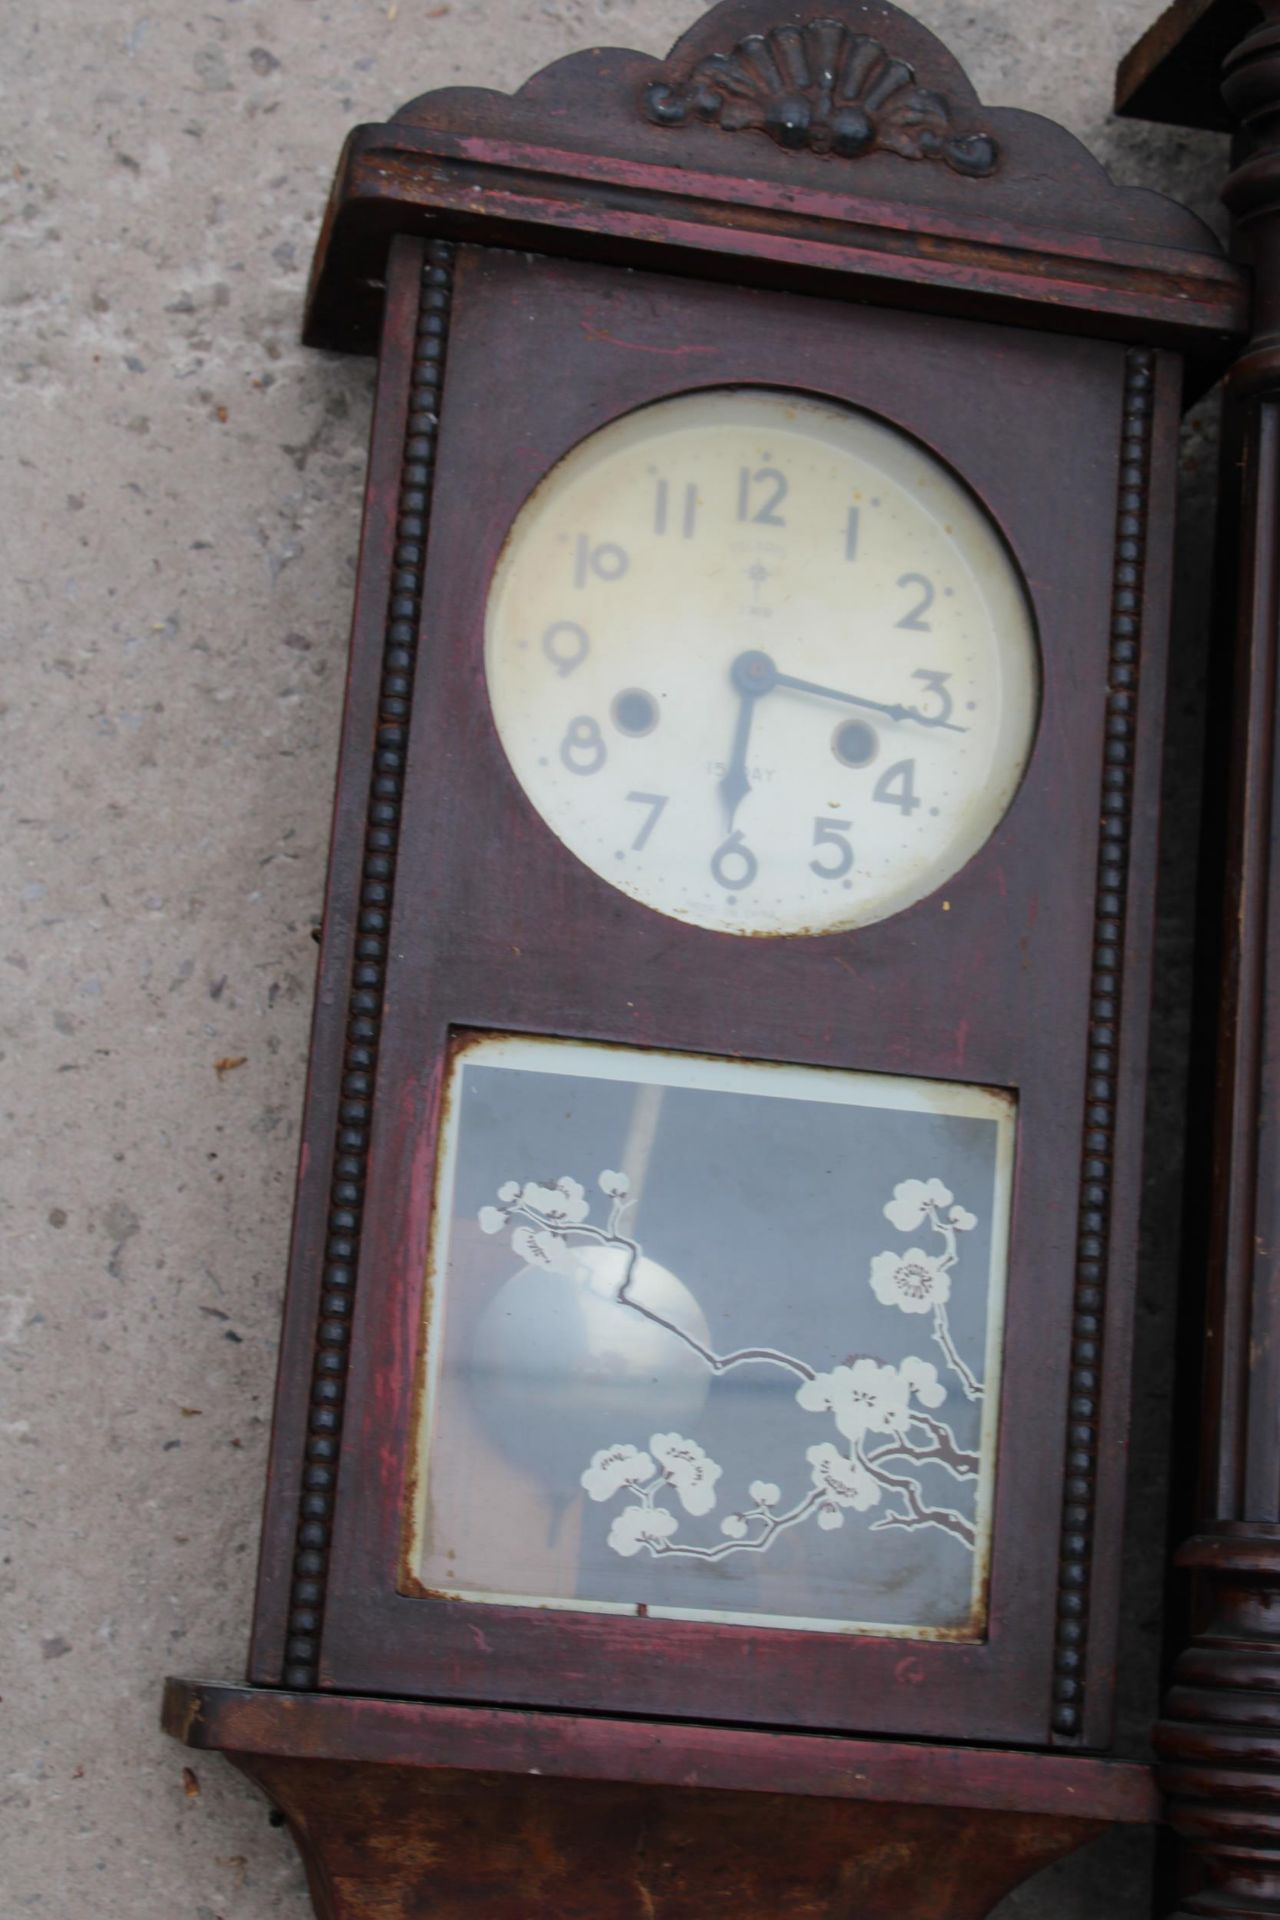 TWO VINTAGE WOODEN CASED WALL CLOCKS - Image 2 of 3